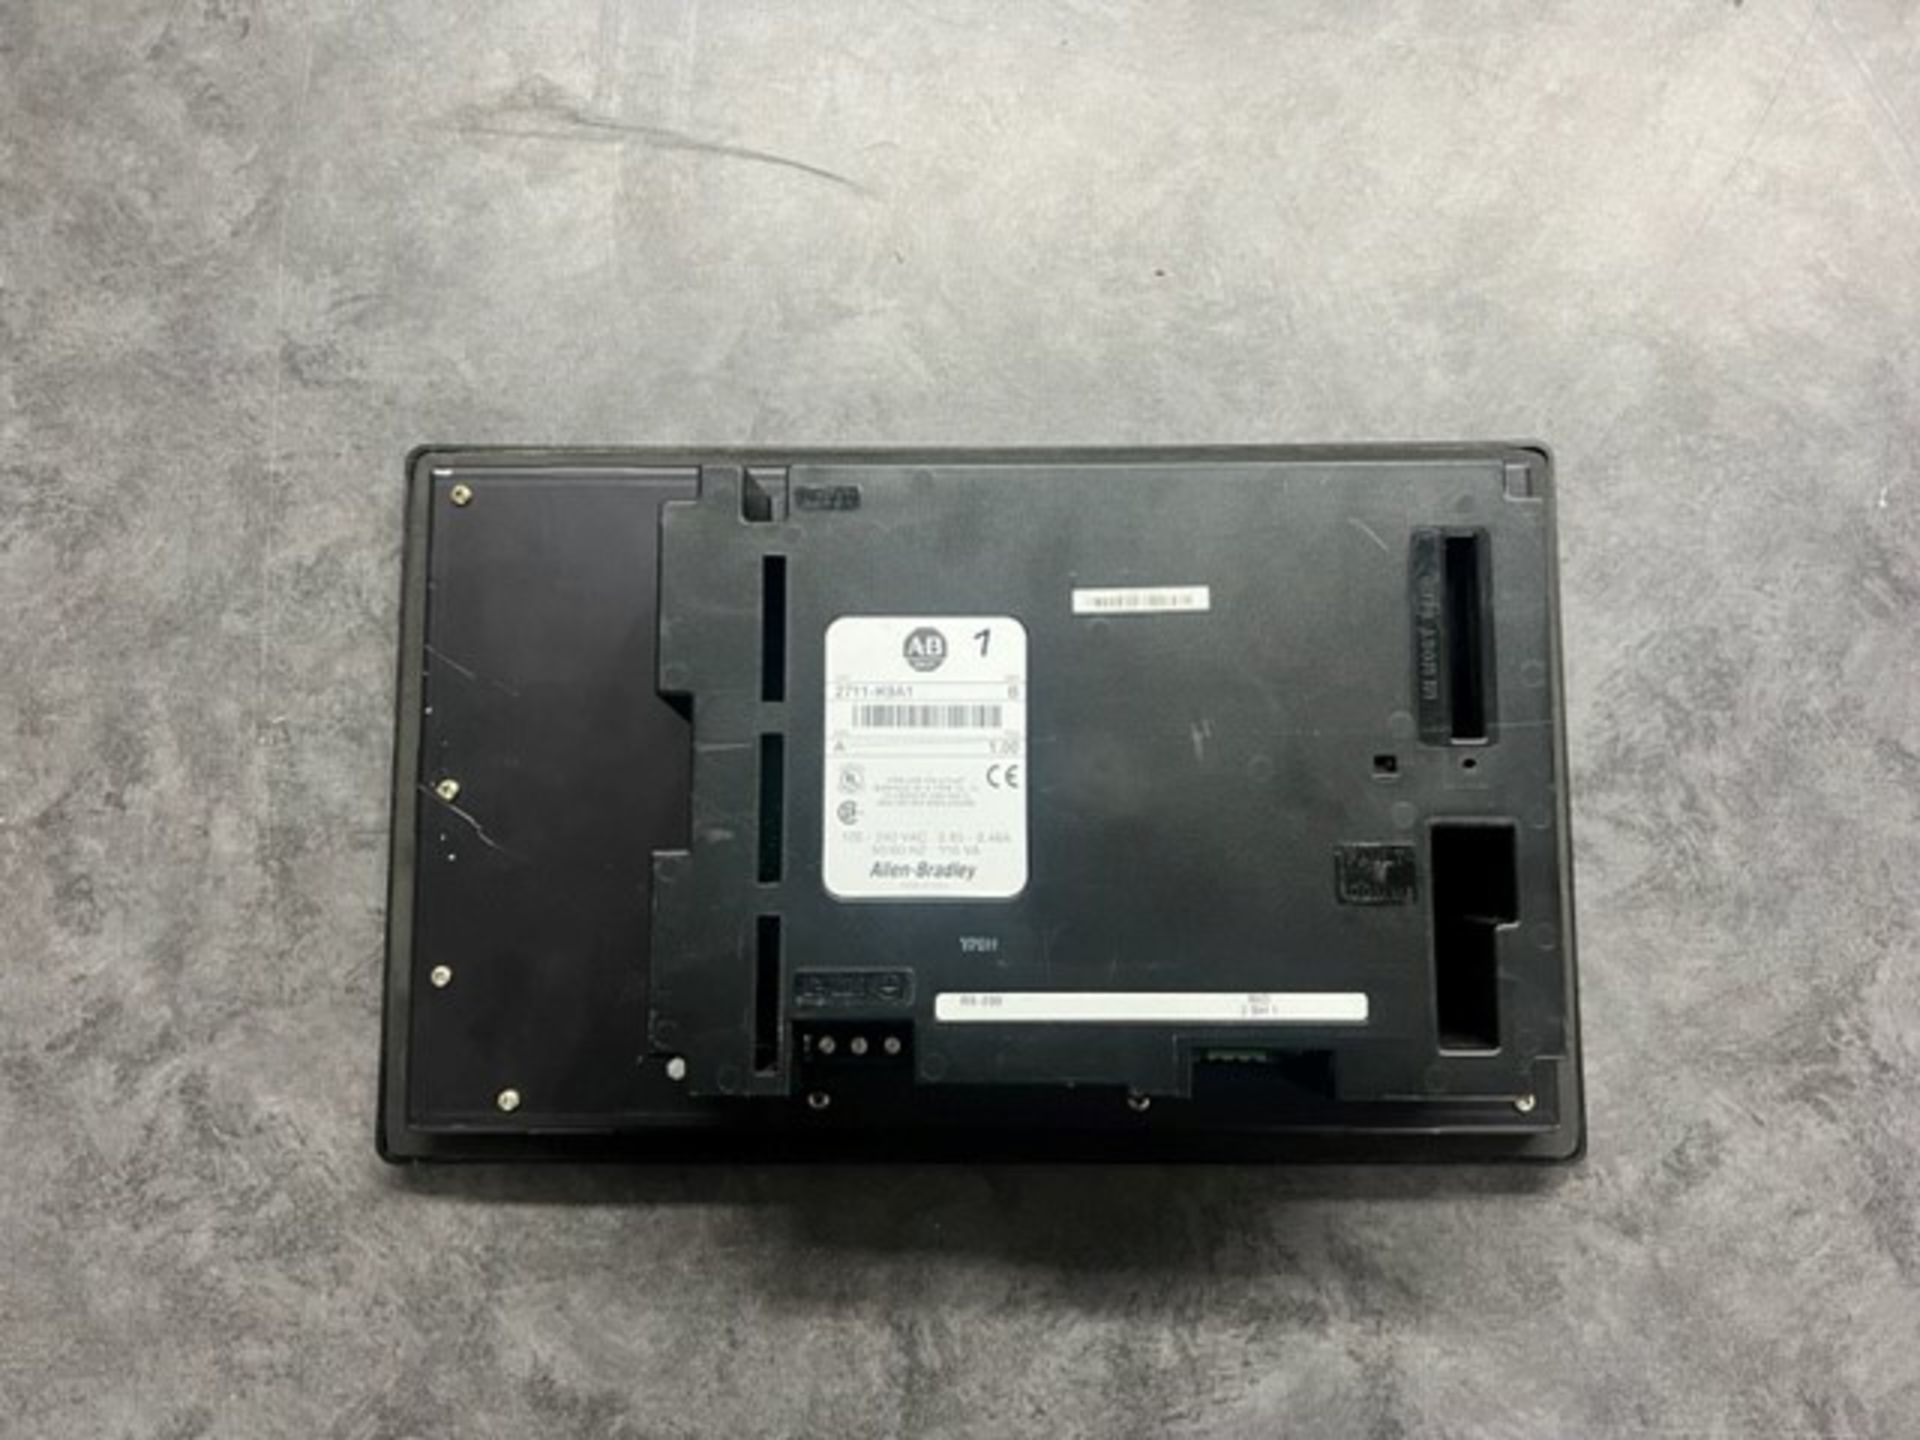 Allen Bradley PanelView 900 Touchpad Display Screen, CAT #2711-K9A1, REV A, Series B (Load Fee - Image 3 of 4